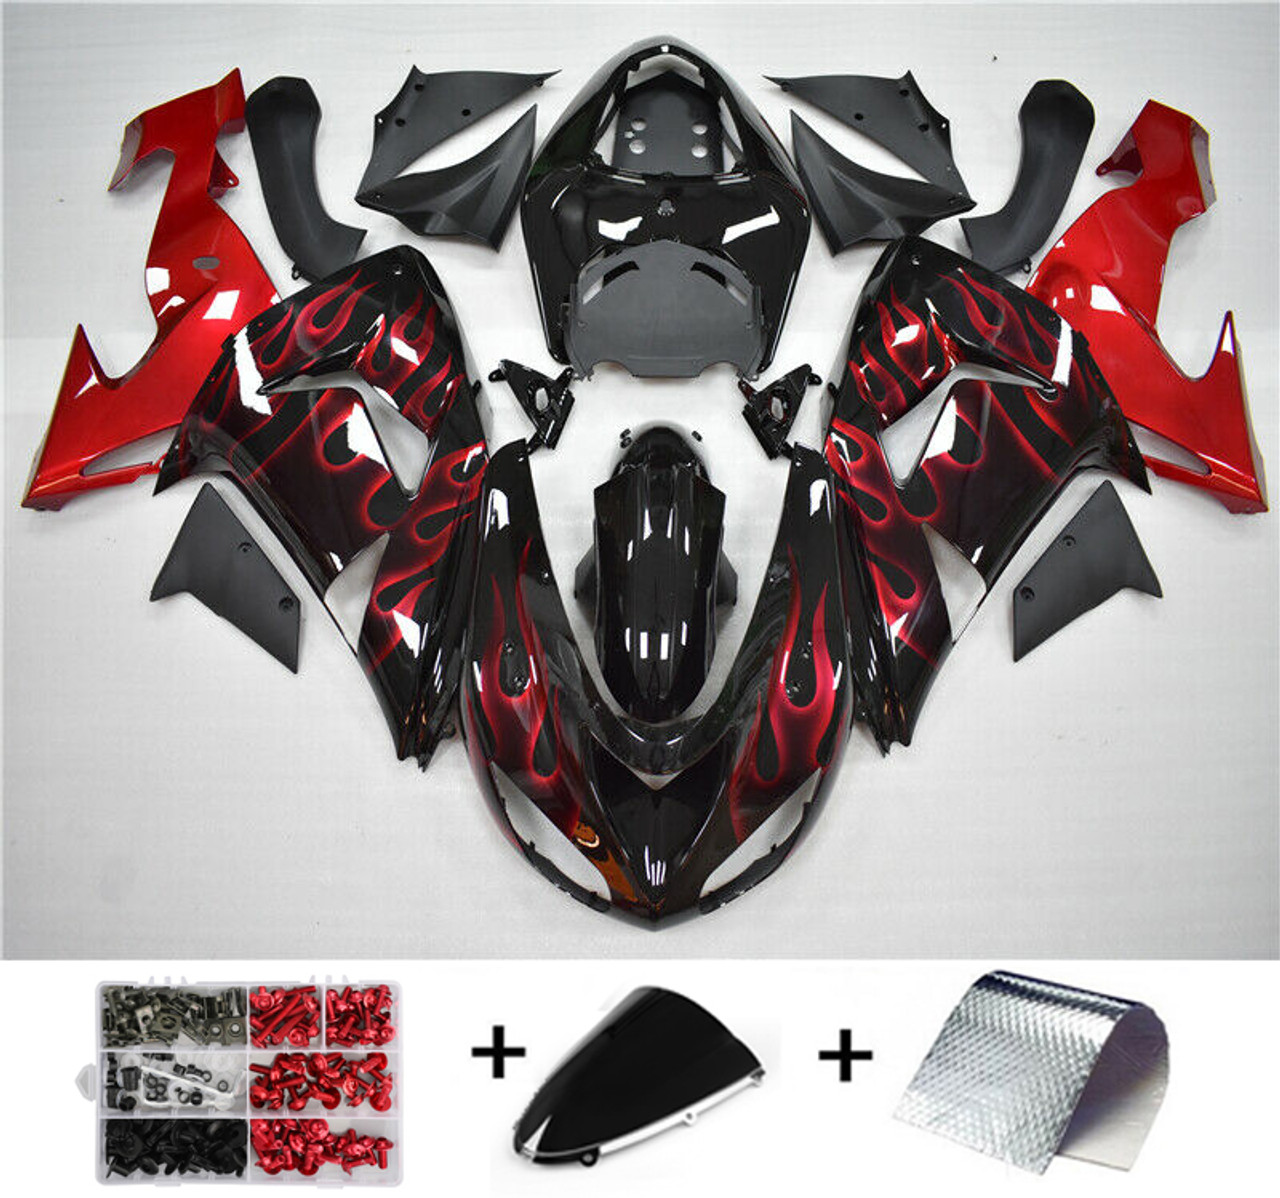 Red Flames Injection Fairing Kit Plastic Fit for Kawasaki ZX10R 2006 2007